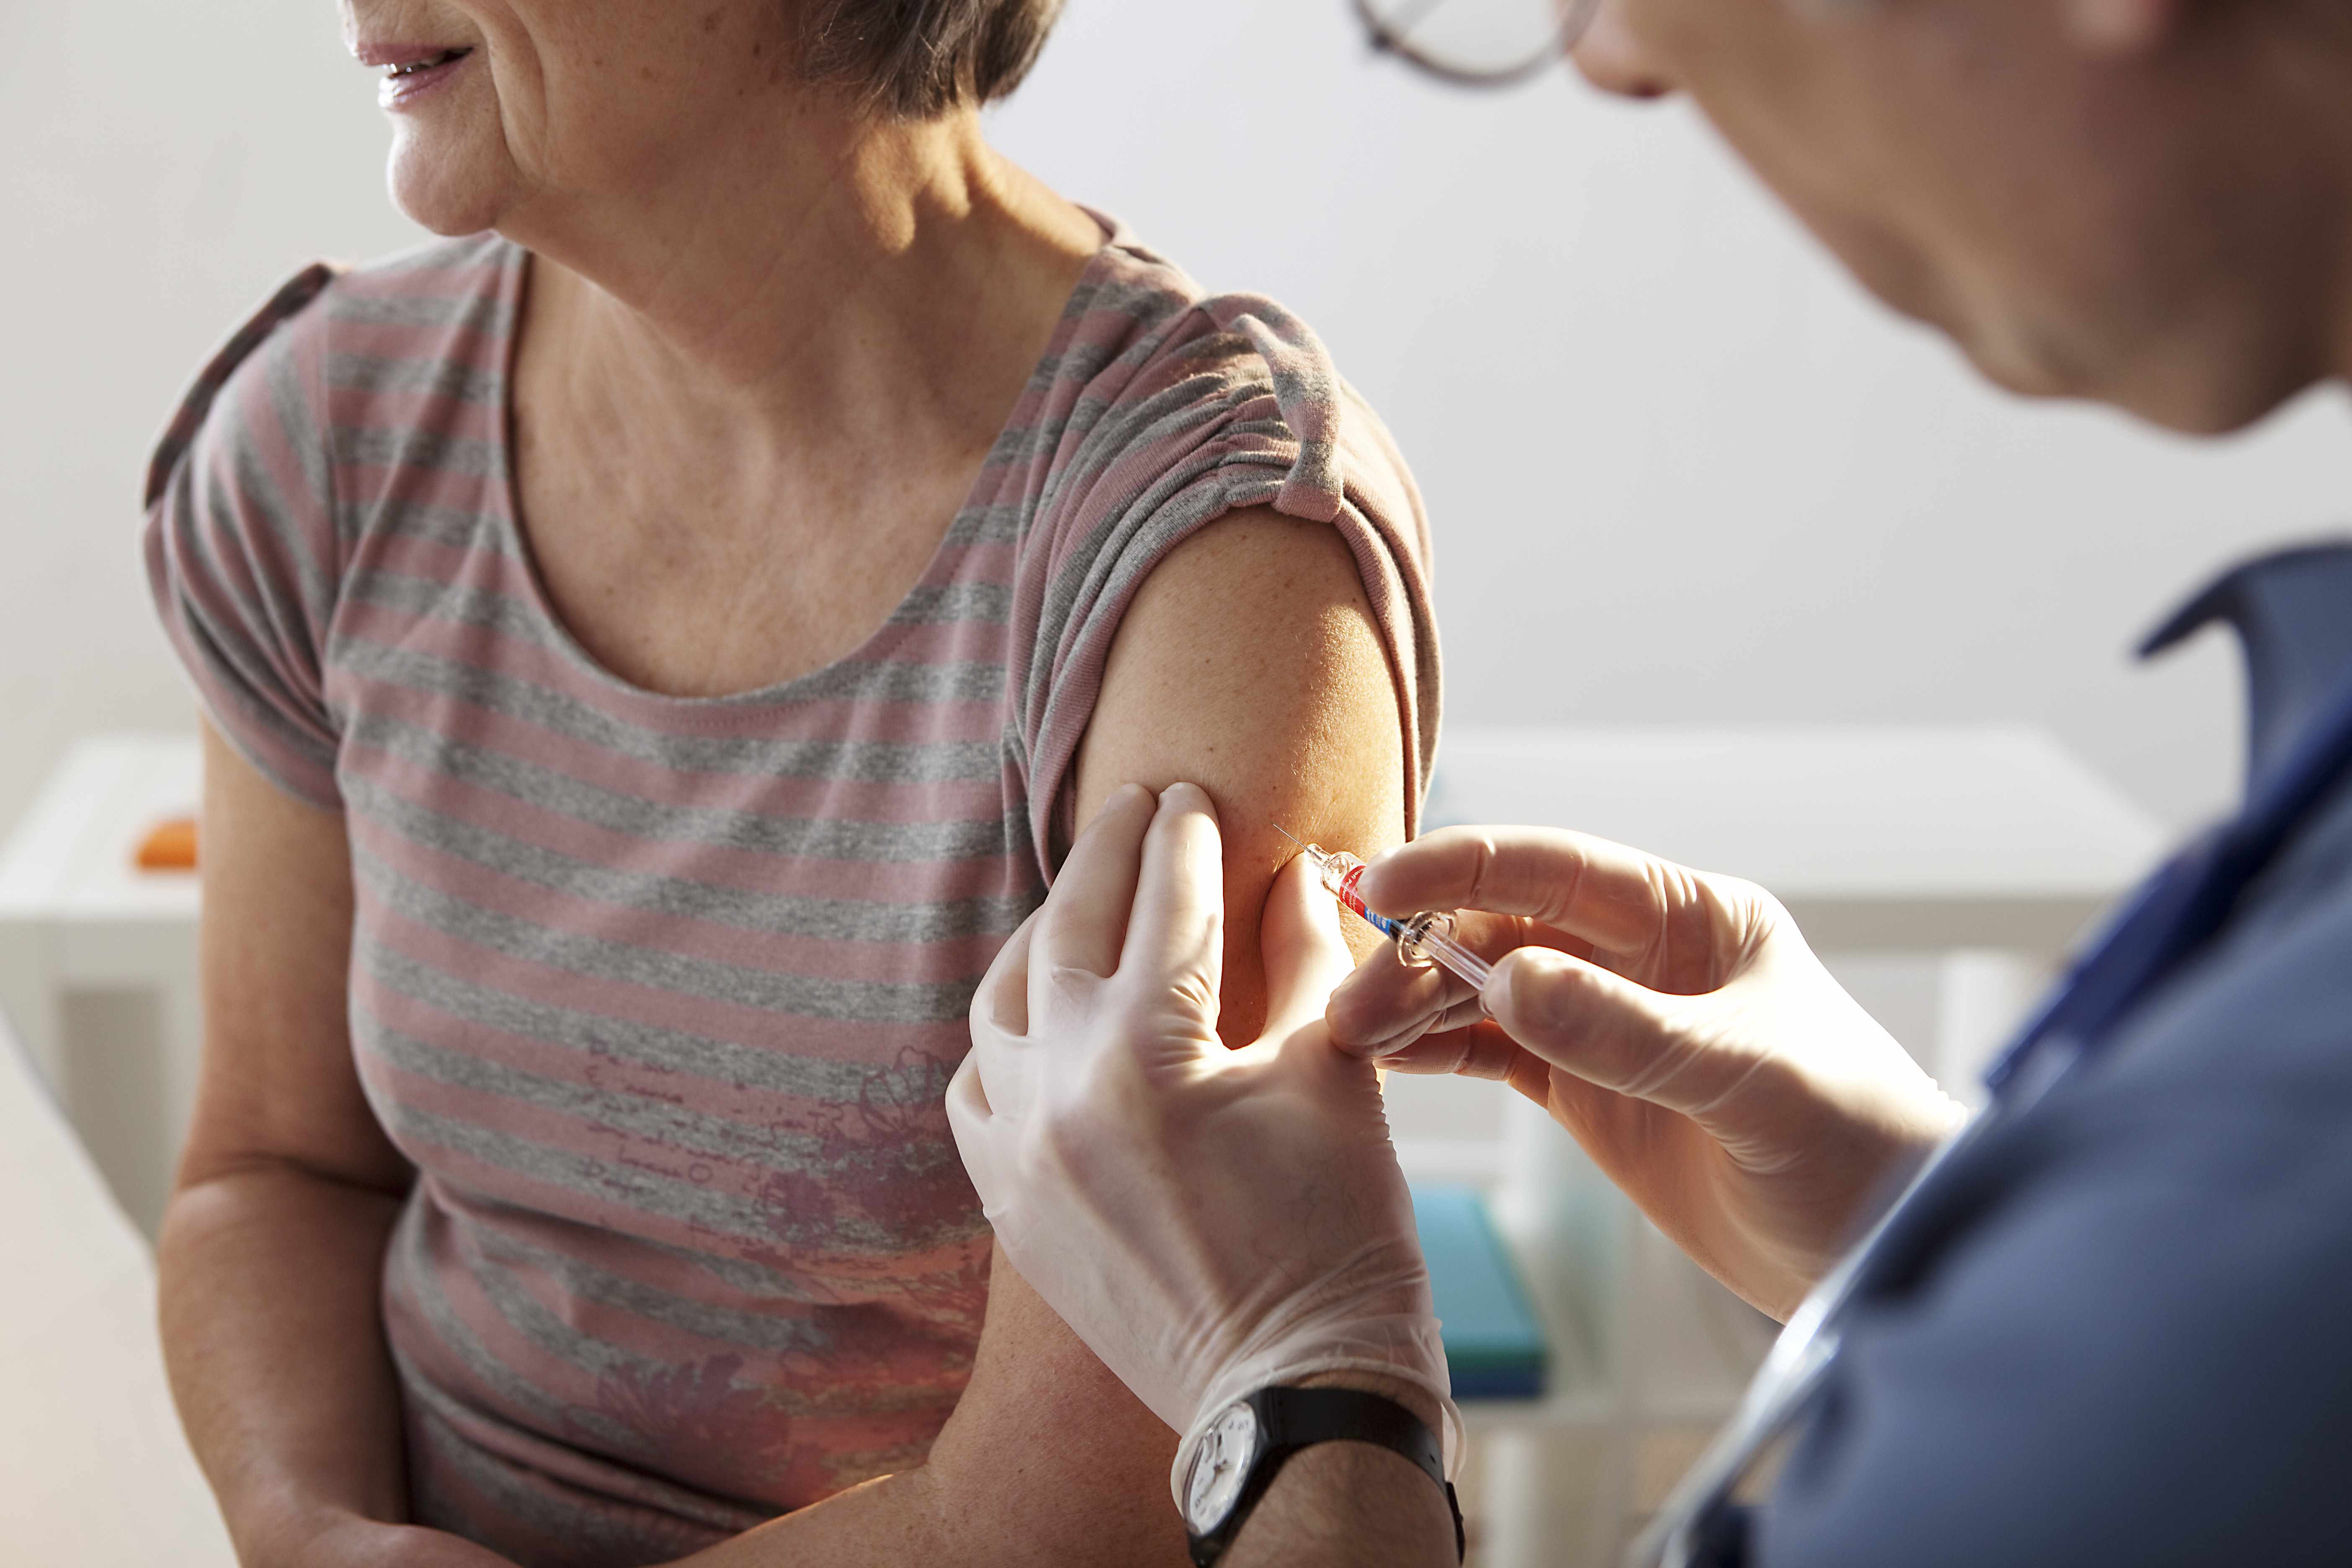 a middle-aged woman getting a vaccination shot